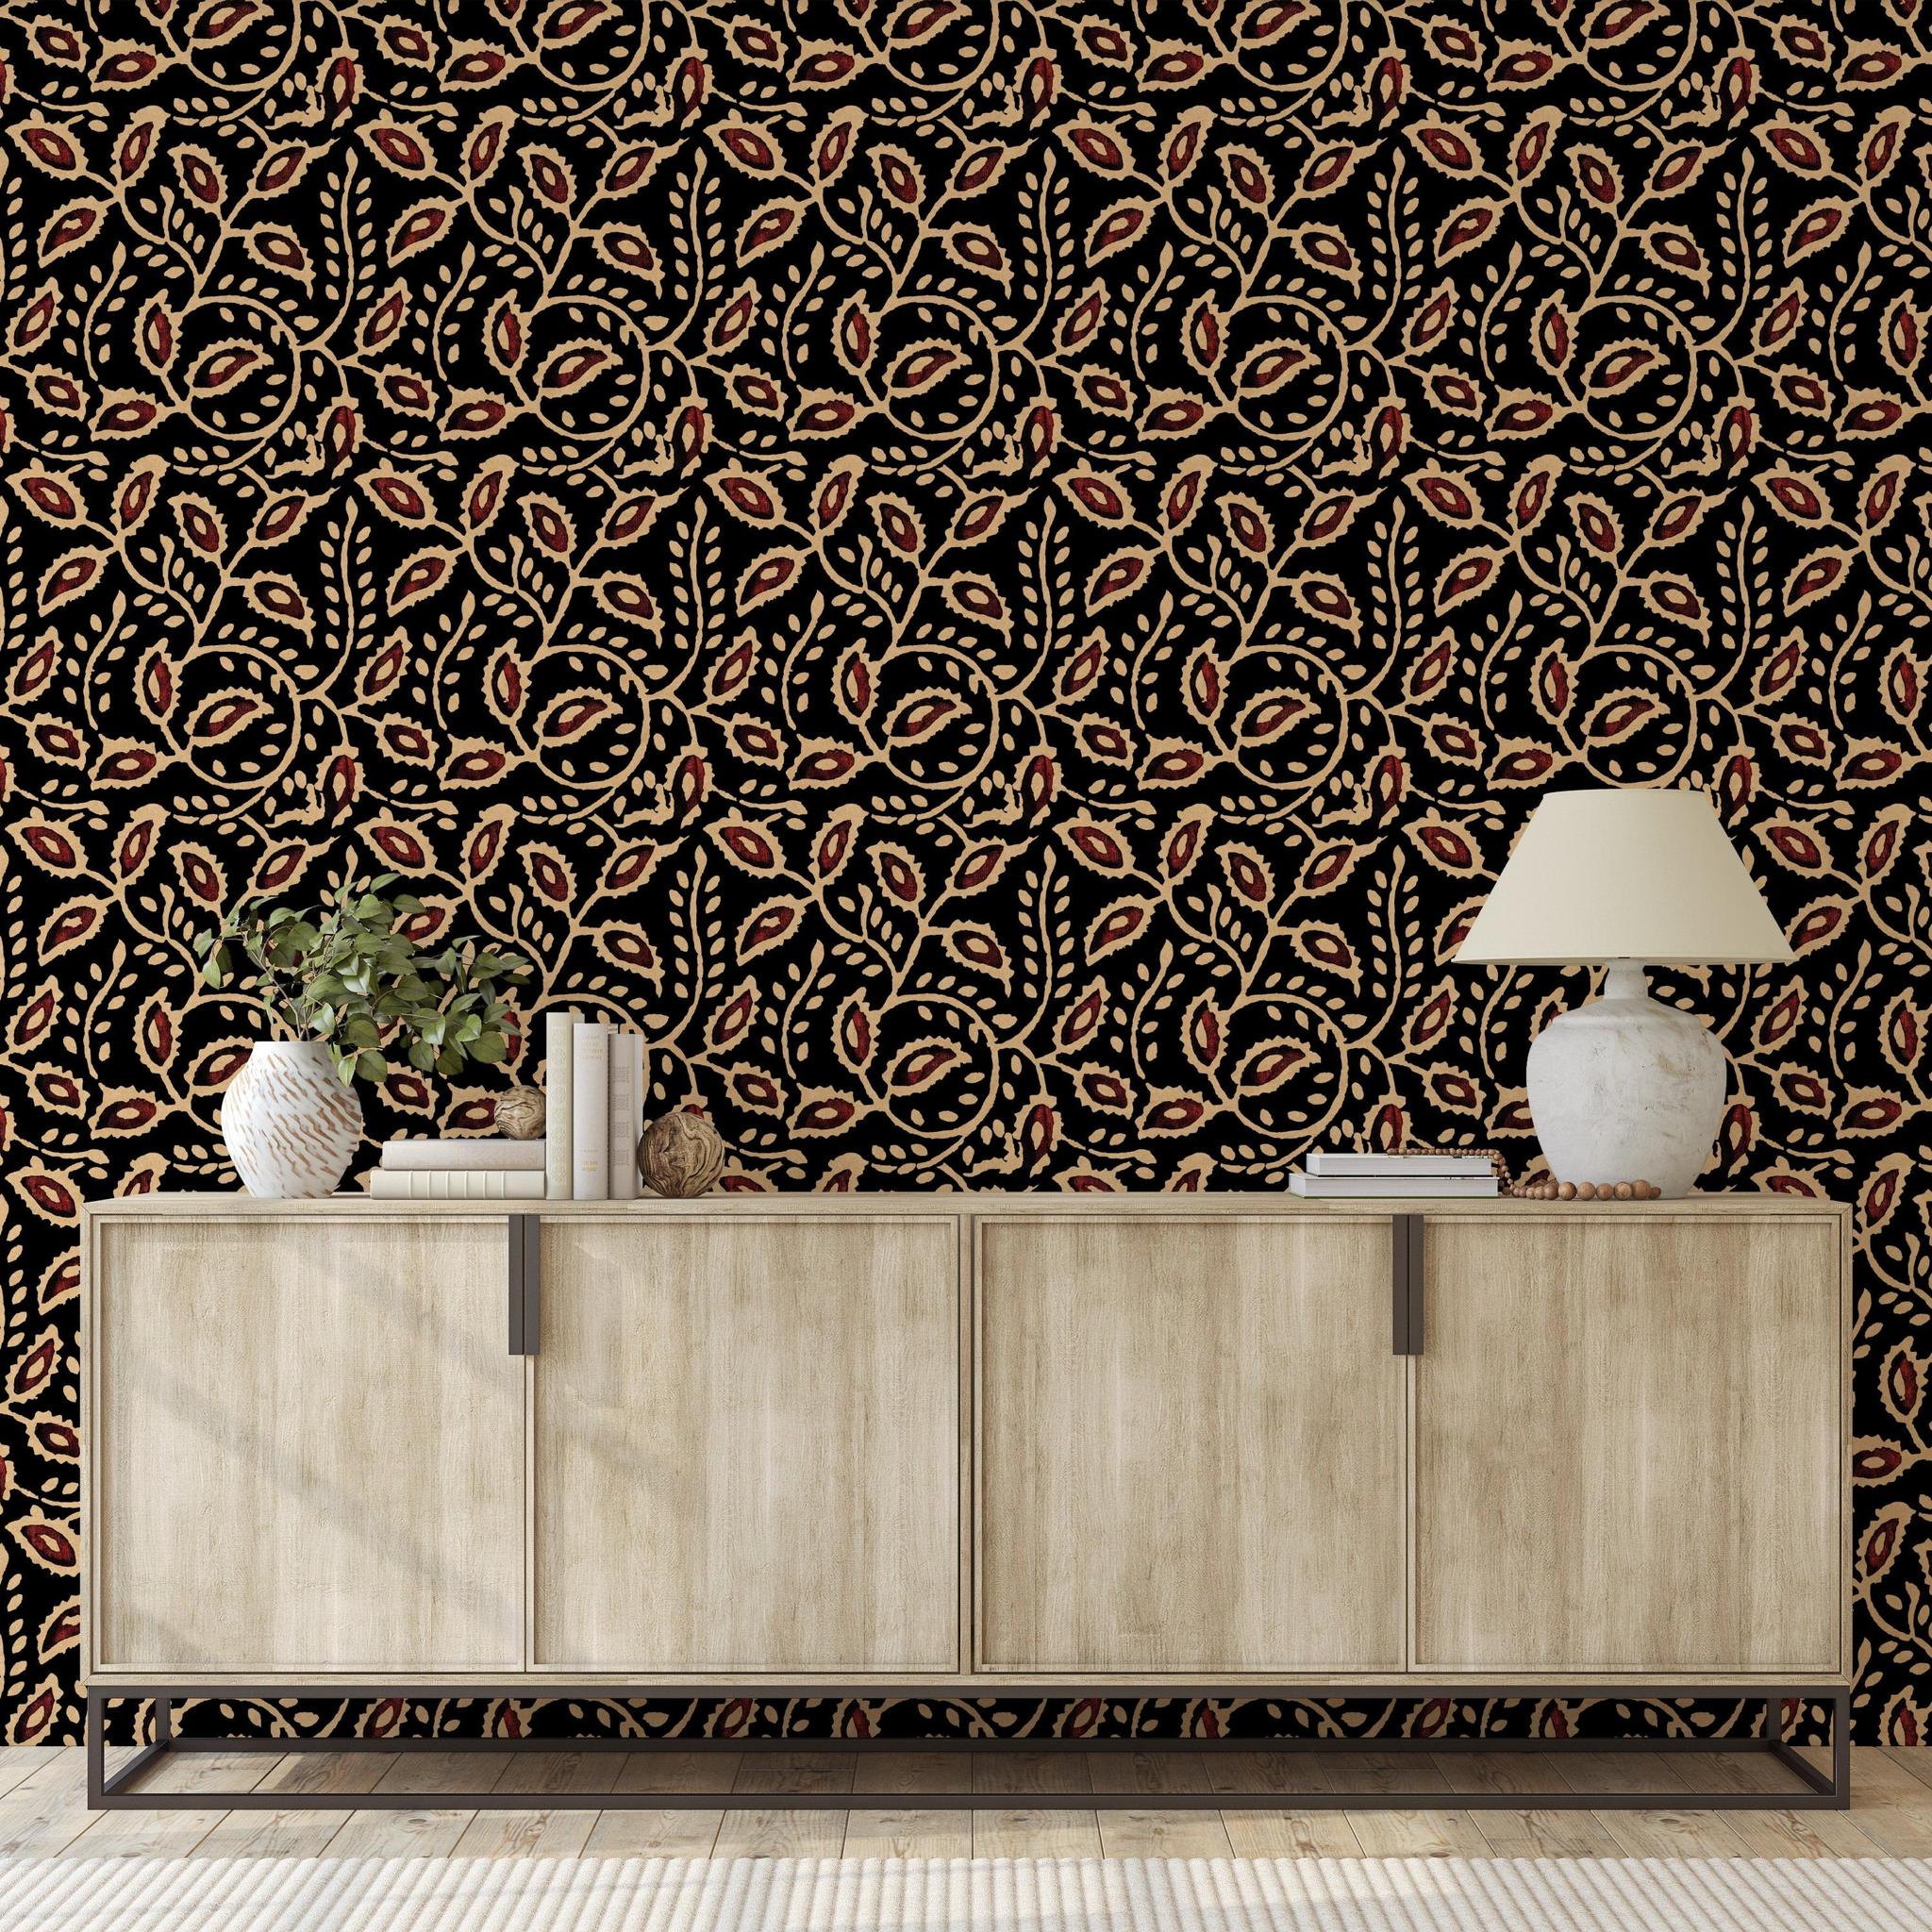 Wall Blush SG02's Heart of Mine Wallpaper in a modern living room, highlighting stylish wall decor.
